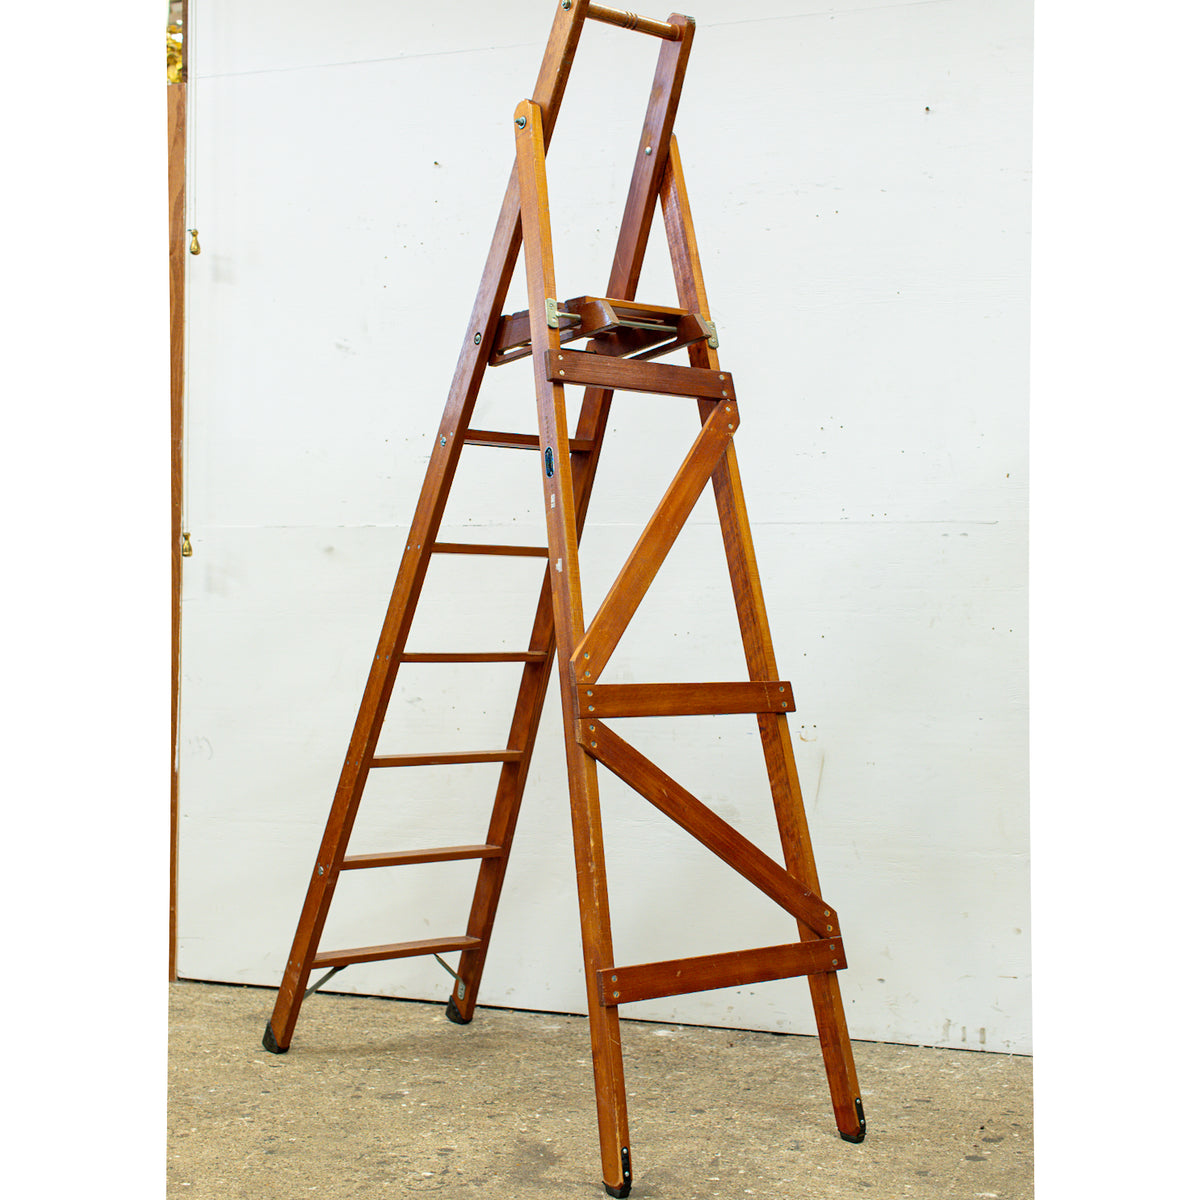 Reclaimed 20th Century Wooden Slingsby Ladders | 5 Sets Available | The Architectural Forum